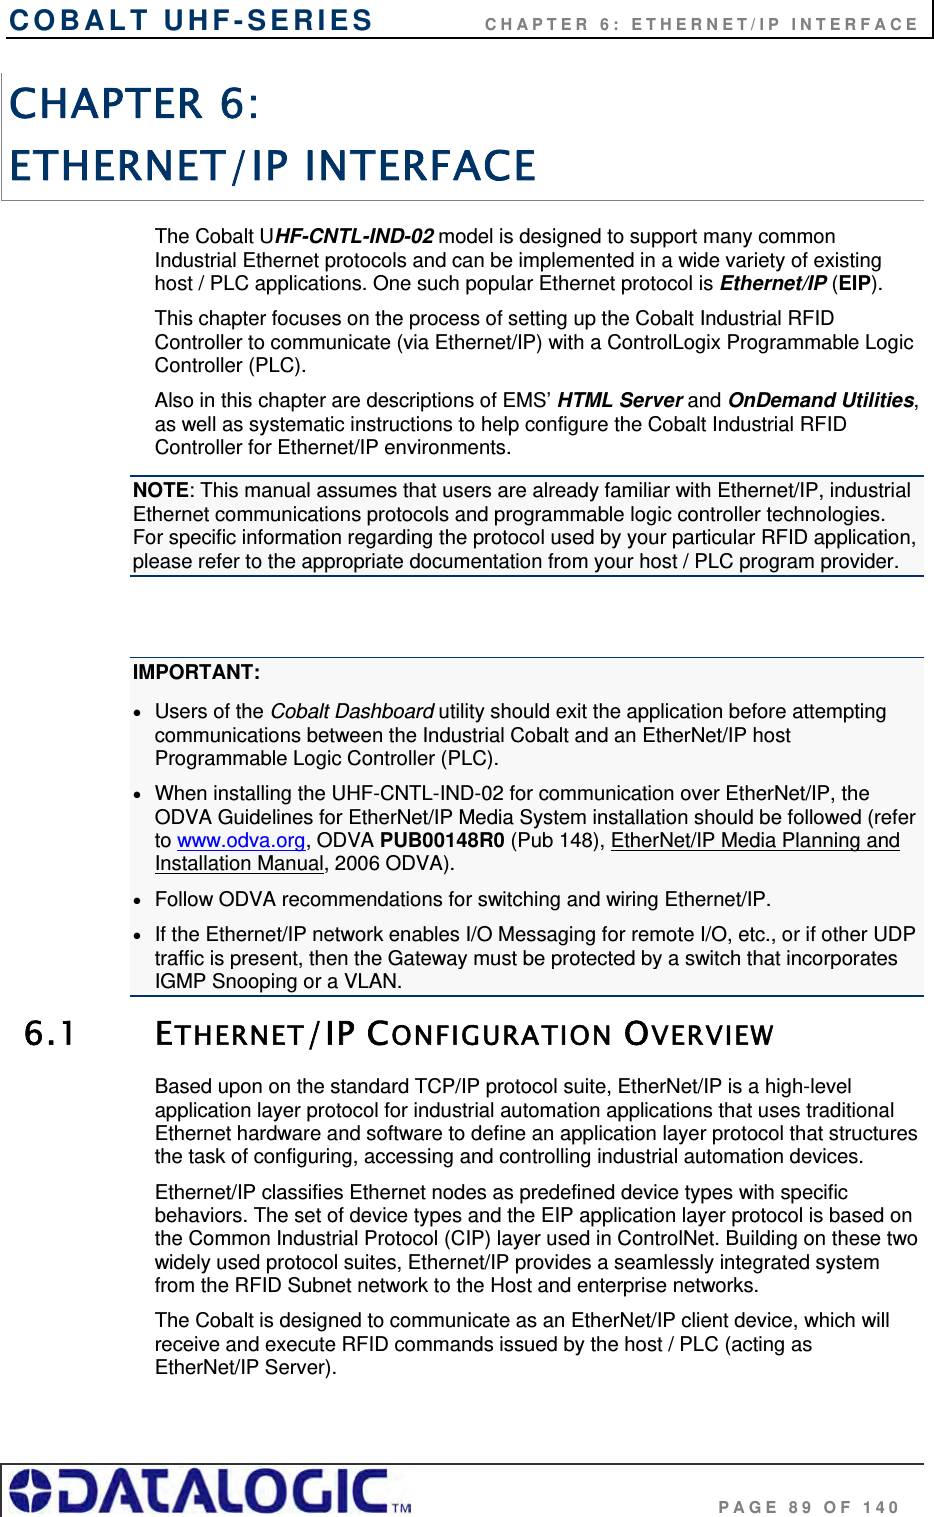 COBALT UHF-SERIES    CHAPTER 6: ETHERNET/IP INTERFACE                                     PAGE 89 OF 140 CHAPTER 6:  ETHERNET/IP INTERFACE The Cobalt UHF-CNTL-IND-02 model is designed to support many common Industrial Ethernet protocols and can be implemented in a wide variety of existing host / PLC applications. One such popular Ethernet protocol is Ethernet/IP (EIP).  This chapter focuses on the process of setting up the Cobalt Industrial RFID Controller to communicate (via Ethernet/IP) with a ControlLogix Programmable Logic Controller (PLC).  Also in this chapter are descriptions of EMS’ HTML Server and OnDemand Utilities, as well as systematic instructions to help configure the Cobalt Industrial RFID Controller for Ethernet/IP environments. NOTE: This manual assumes that users are already familiar with Ethernet/IP, industrial Ethernet communications protocols and programmable logic controller technologies. For specific information regarding the protocol used by your particular RFID application, please refer to the appropriate documentation from your host / PLC program provider.  IMPORTANT:  Users of the Cobalt Dashboard utility should exit the application before attempting communications between the Industrial Cobalt and an EtherNet/IP host Programmable Logic Controller (PLC).  When installing the UHF-CNTL-IND-02 for communication over EtherNet/IP, the ODVA Guidelines for EtherNet/IP Media System installation should be followed (refer to www.odva.org, ODVA PUB00148R0 (Pub 148), EtherNet/IP Media Planning and Installation Manual, 2006 ODVA).  Follow ODVA recommendations for switching and wiring Ethernet/IP.  If the Ethernet/IP network enables I/O Messaging for remote I/O, etc., or if other UDP traffic is present, then the Gateway must be protected by a switch that incorporates IGMP Snooping or a VLAN. 6.1 ETHERNET/IP CONFIGURATION OVERVIEW Based upon on the standard TCP/IP protocol suite, EtherNet/IP is a high-level application layer protocol for industrial automation applications that uses traditional Ethernet hardware and software to define an application layer protocol that structures the task of configuring, accessing and controlling industrial automation devices.  Ethernet/IP classifies Ethernet nodes as predefined device types with specific behaviors. The set of device types and the EIP application layer protocol is based on the Common Industrial Protocol (CIP) layer used in ControlNet. Building on these two widely used protocol suites, Ethernet/IP provides a seamlessly integrated system from the RFID Subnet network to the Host and enterprise networks.  The Cobalt is designed to communicate as an EtherNet/IP client device, which will receive and execute RFID commands issued by the host / PLC (acting as EtherNet/IP Server).   